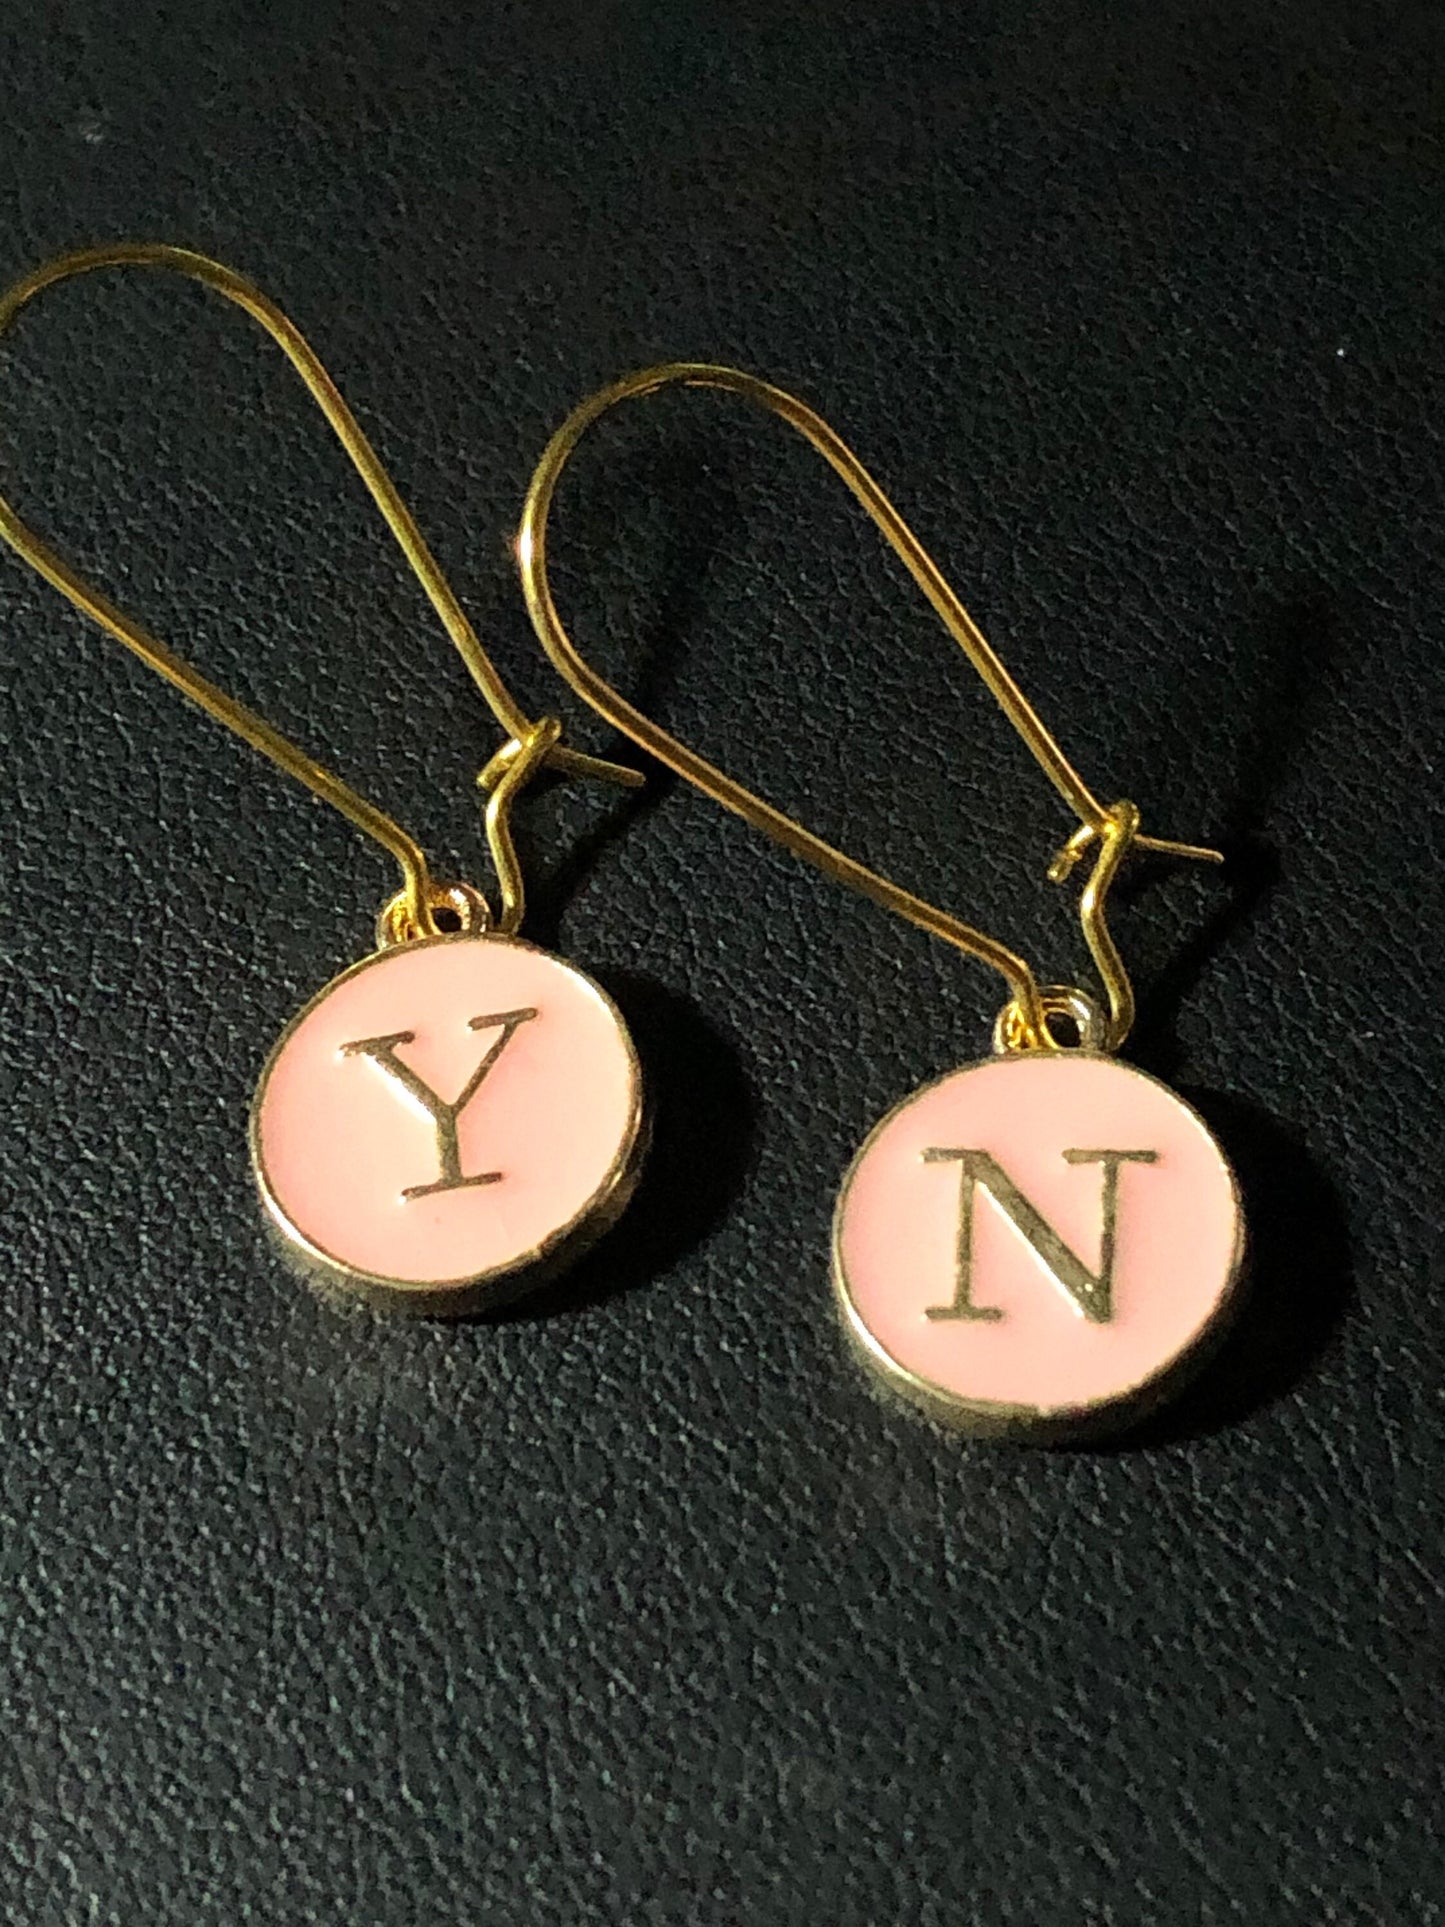 Novelty sexy yes no earrings pink enamel gold tone